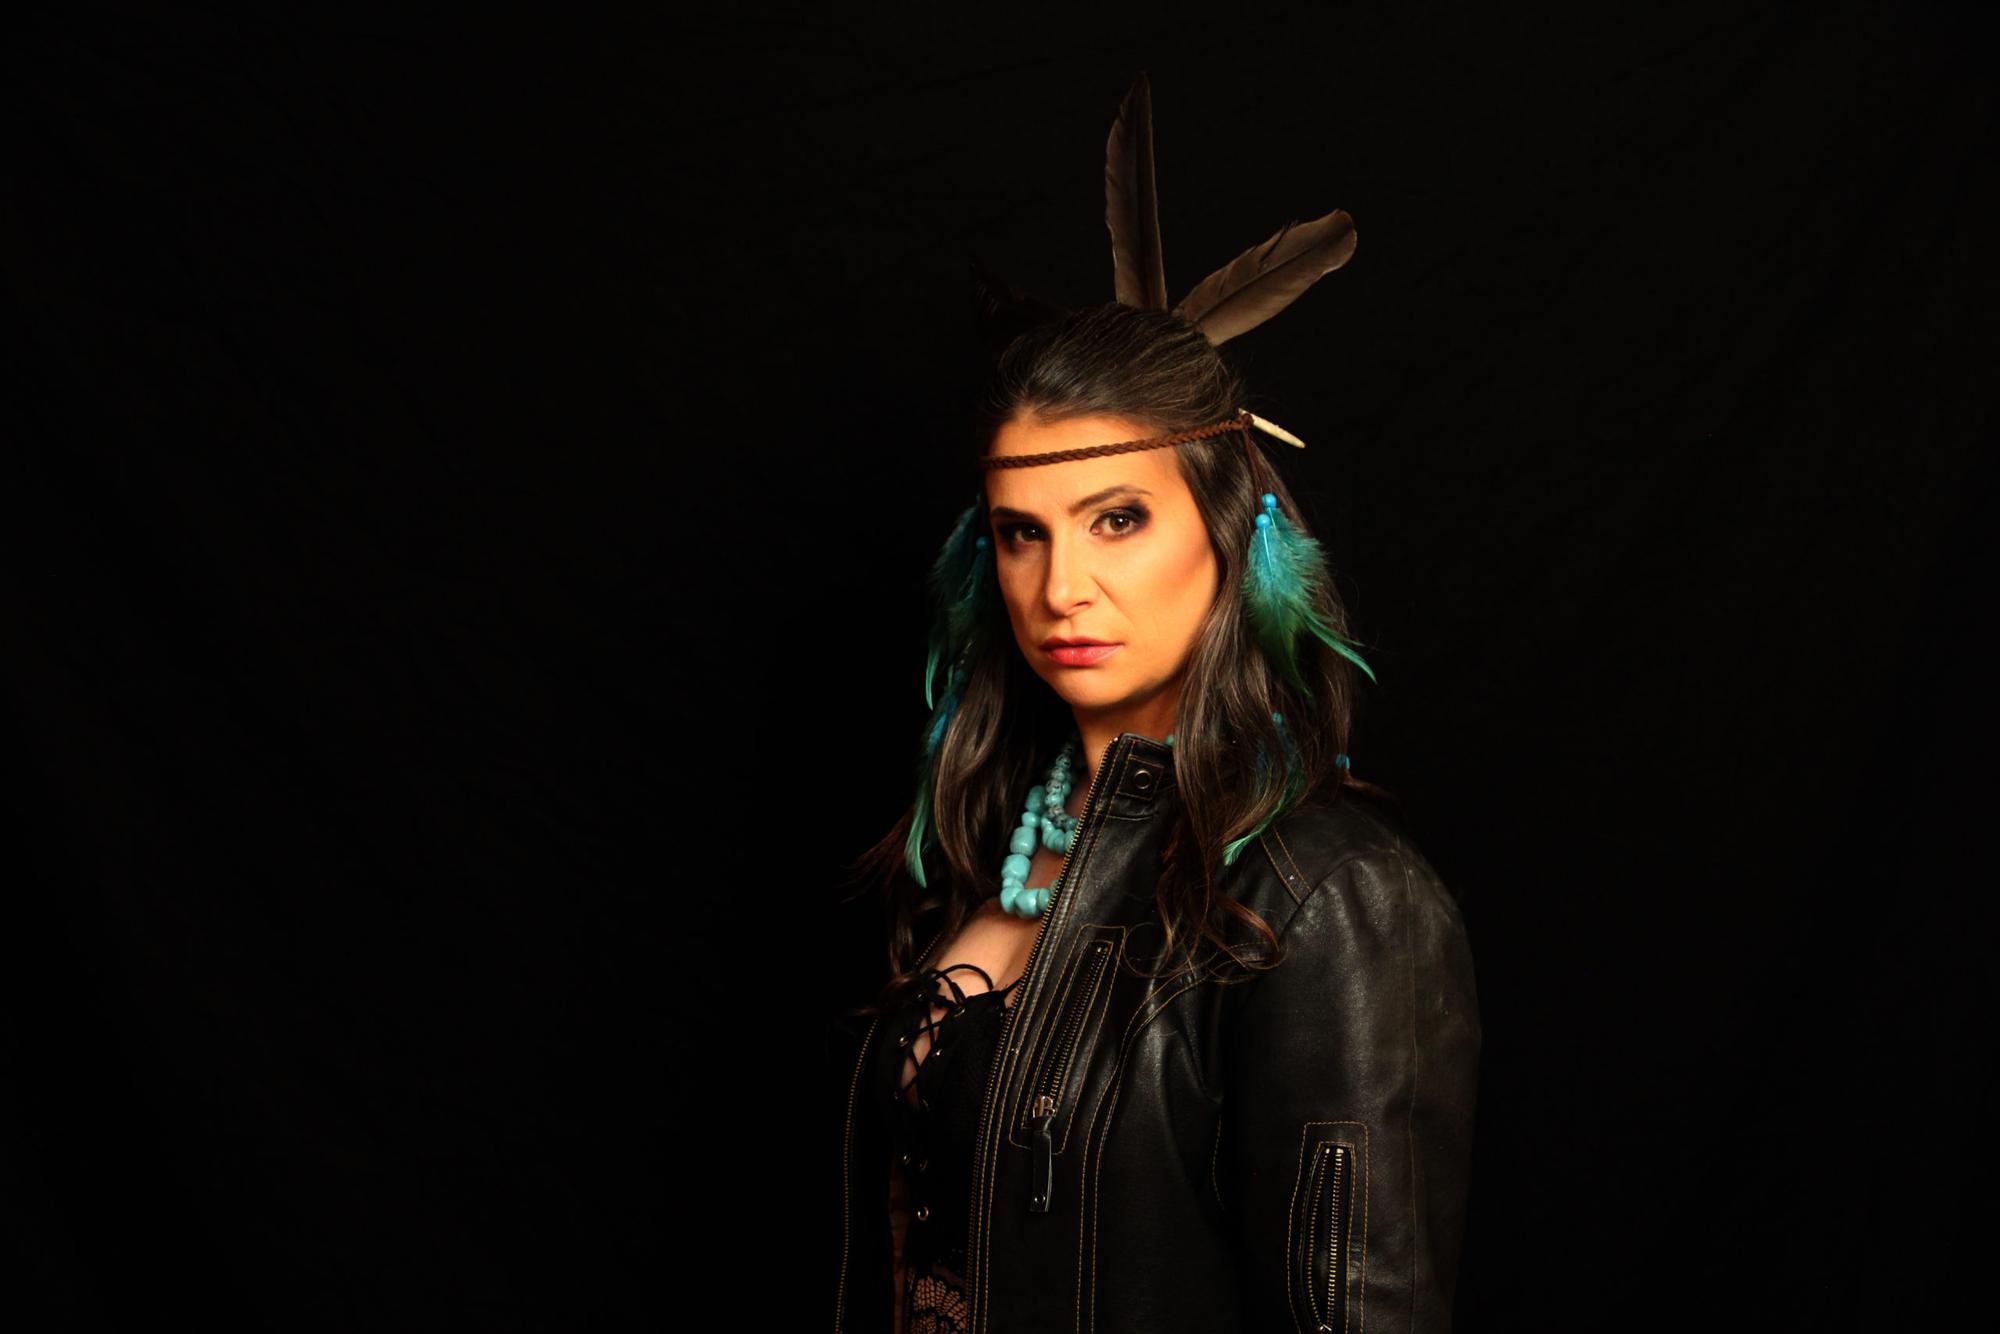 Alexandria artist’s new single combines southern rock style with Indigenous influences